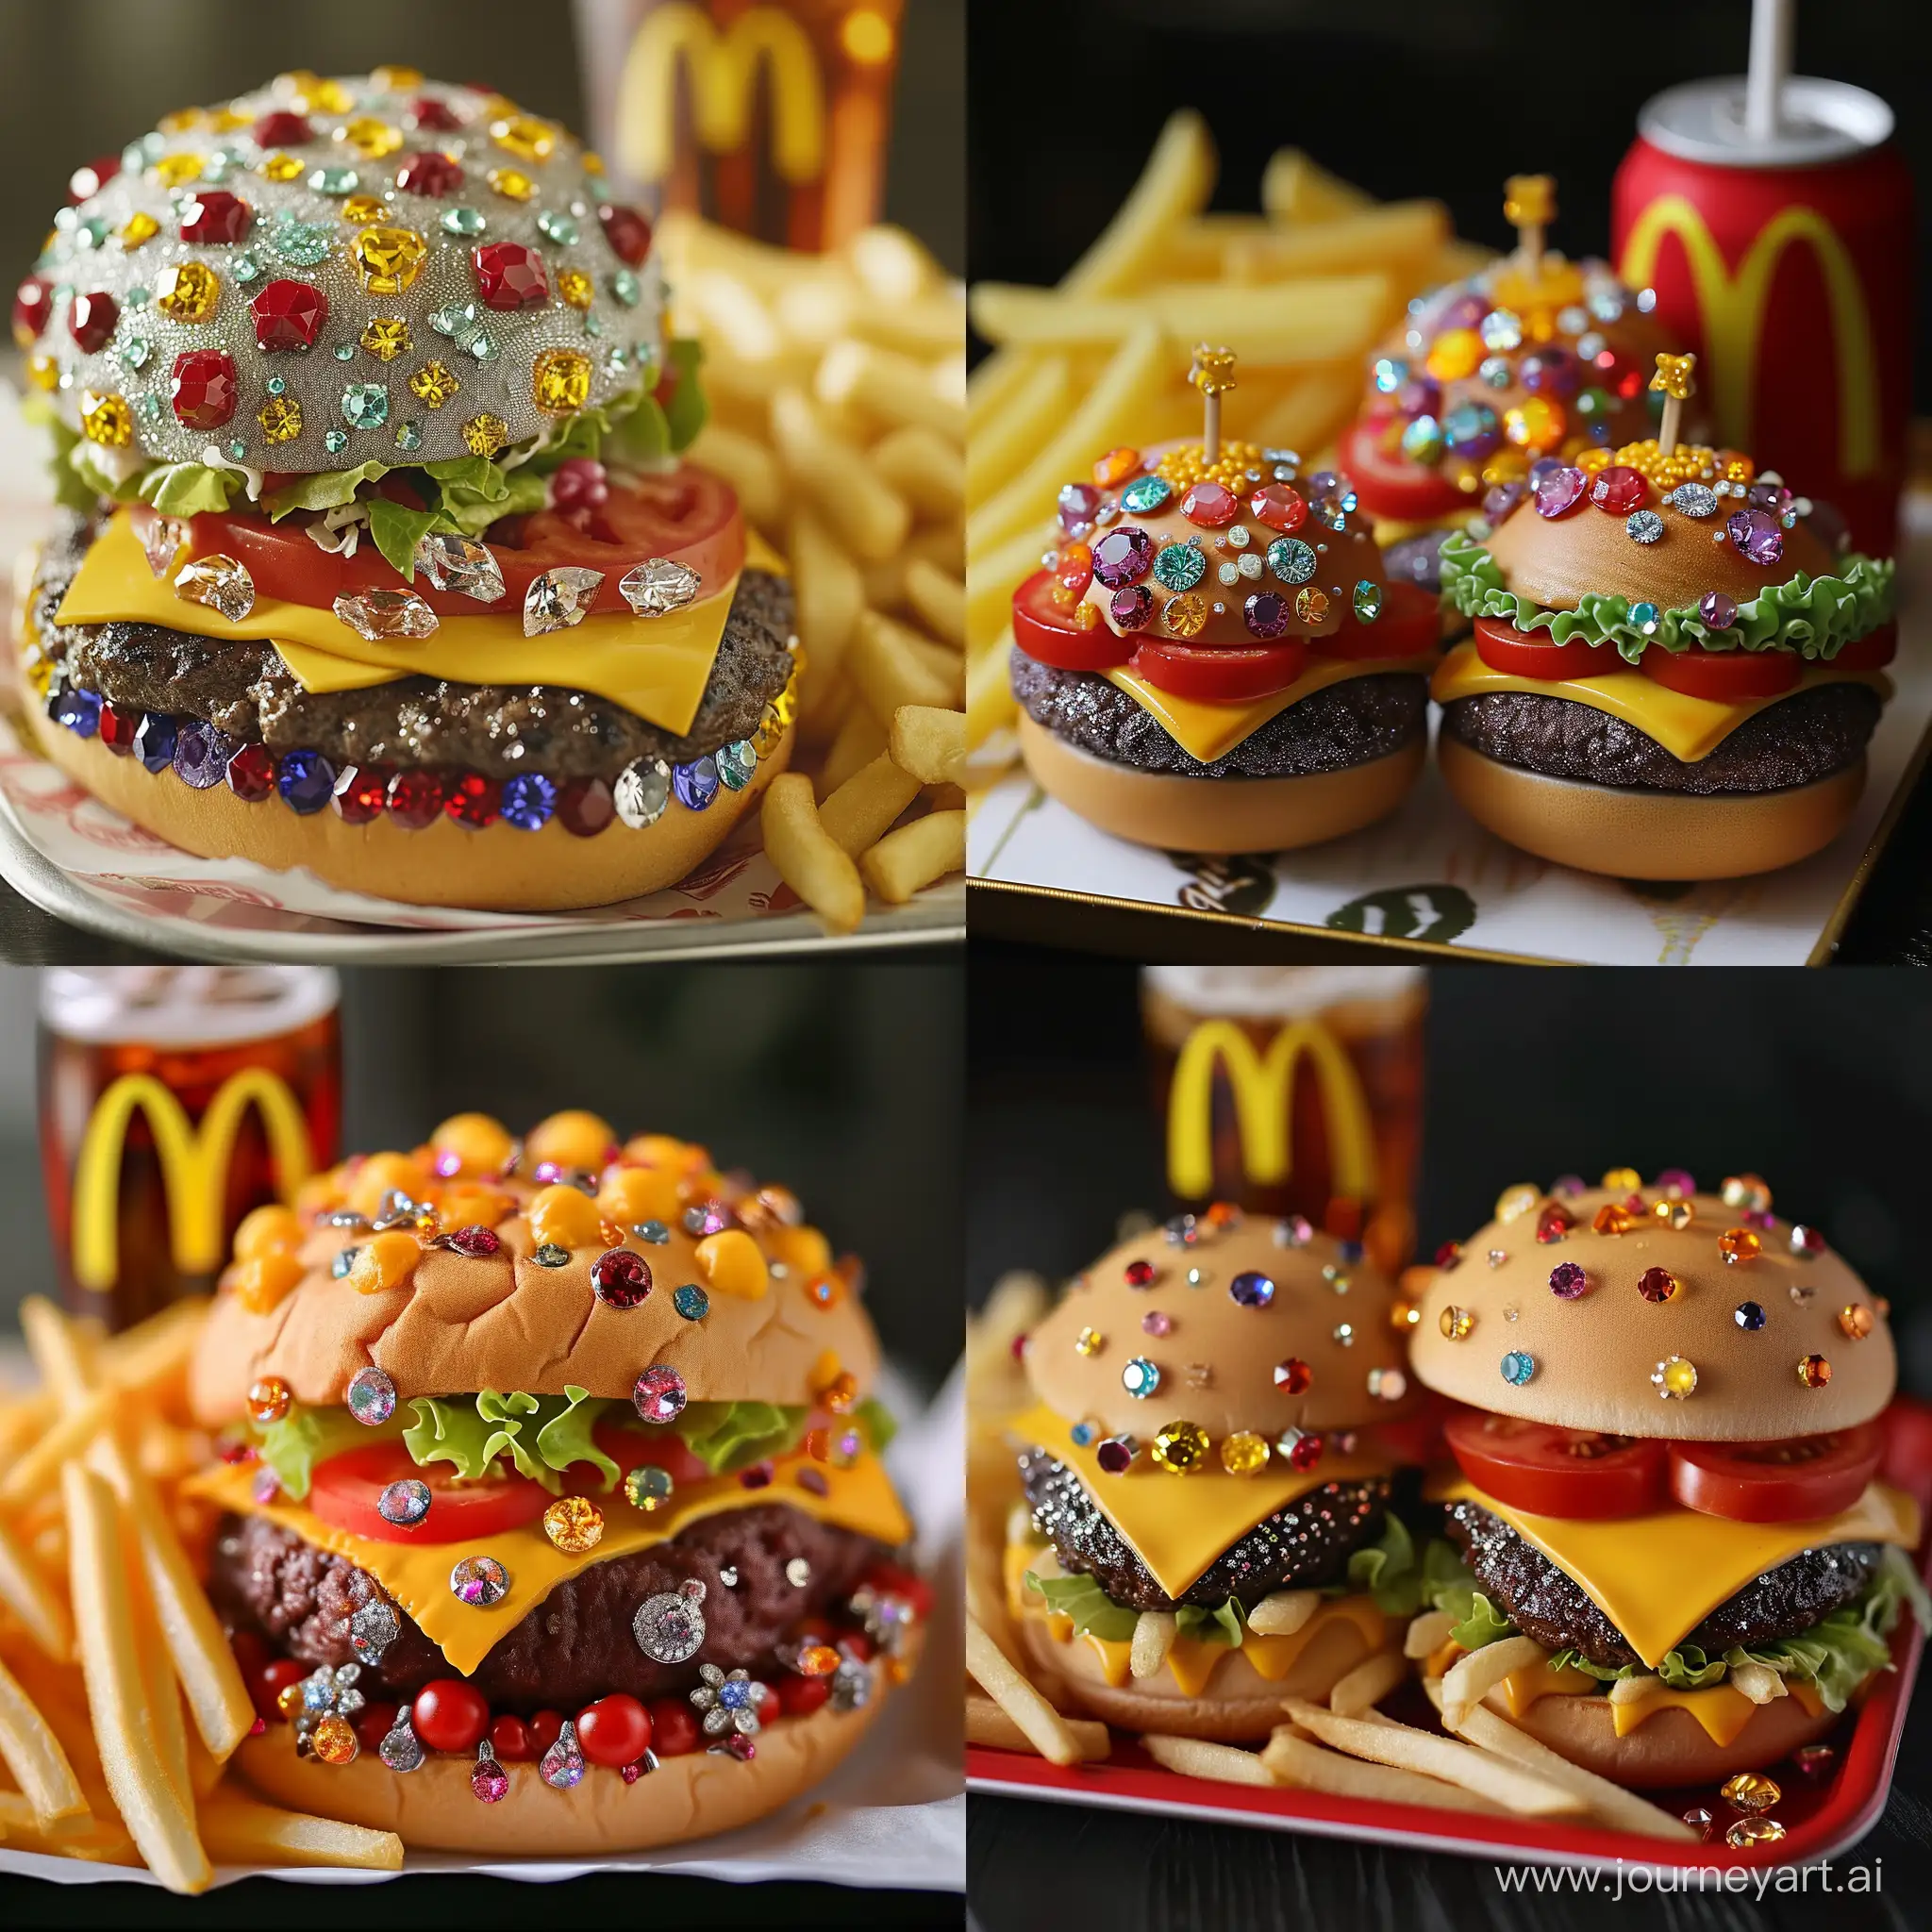 cheeseburger made out of normal burger buns filled with jewels and gemstones that look like beef, tomatoes, cheese and salad sitting on a tray between fries and a coke at a McDonald's Restaurant